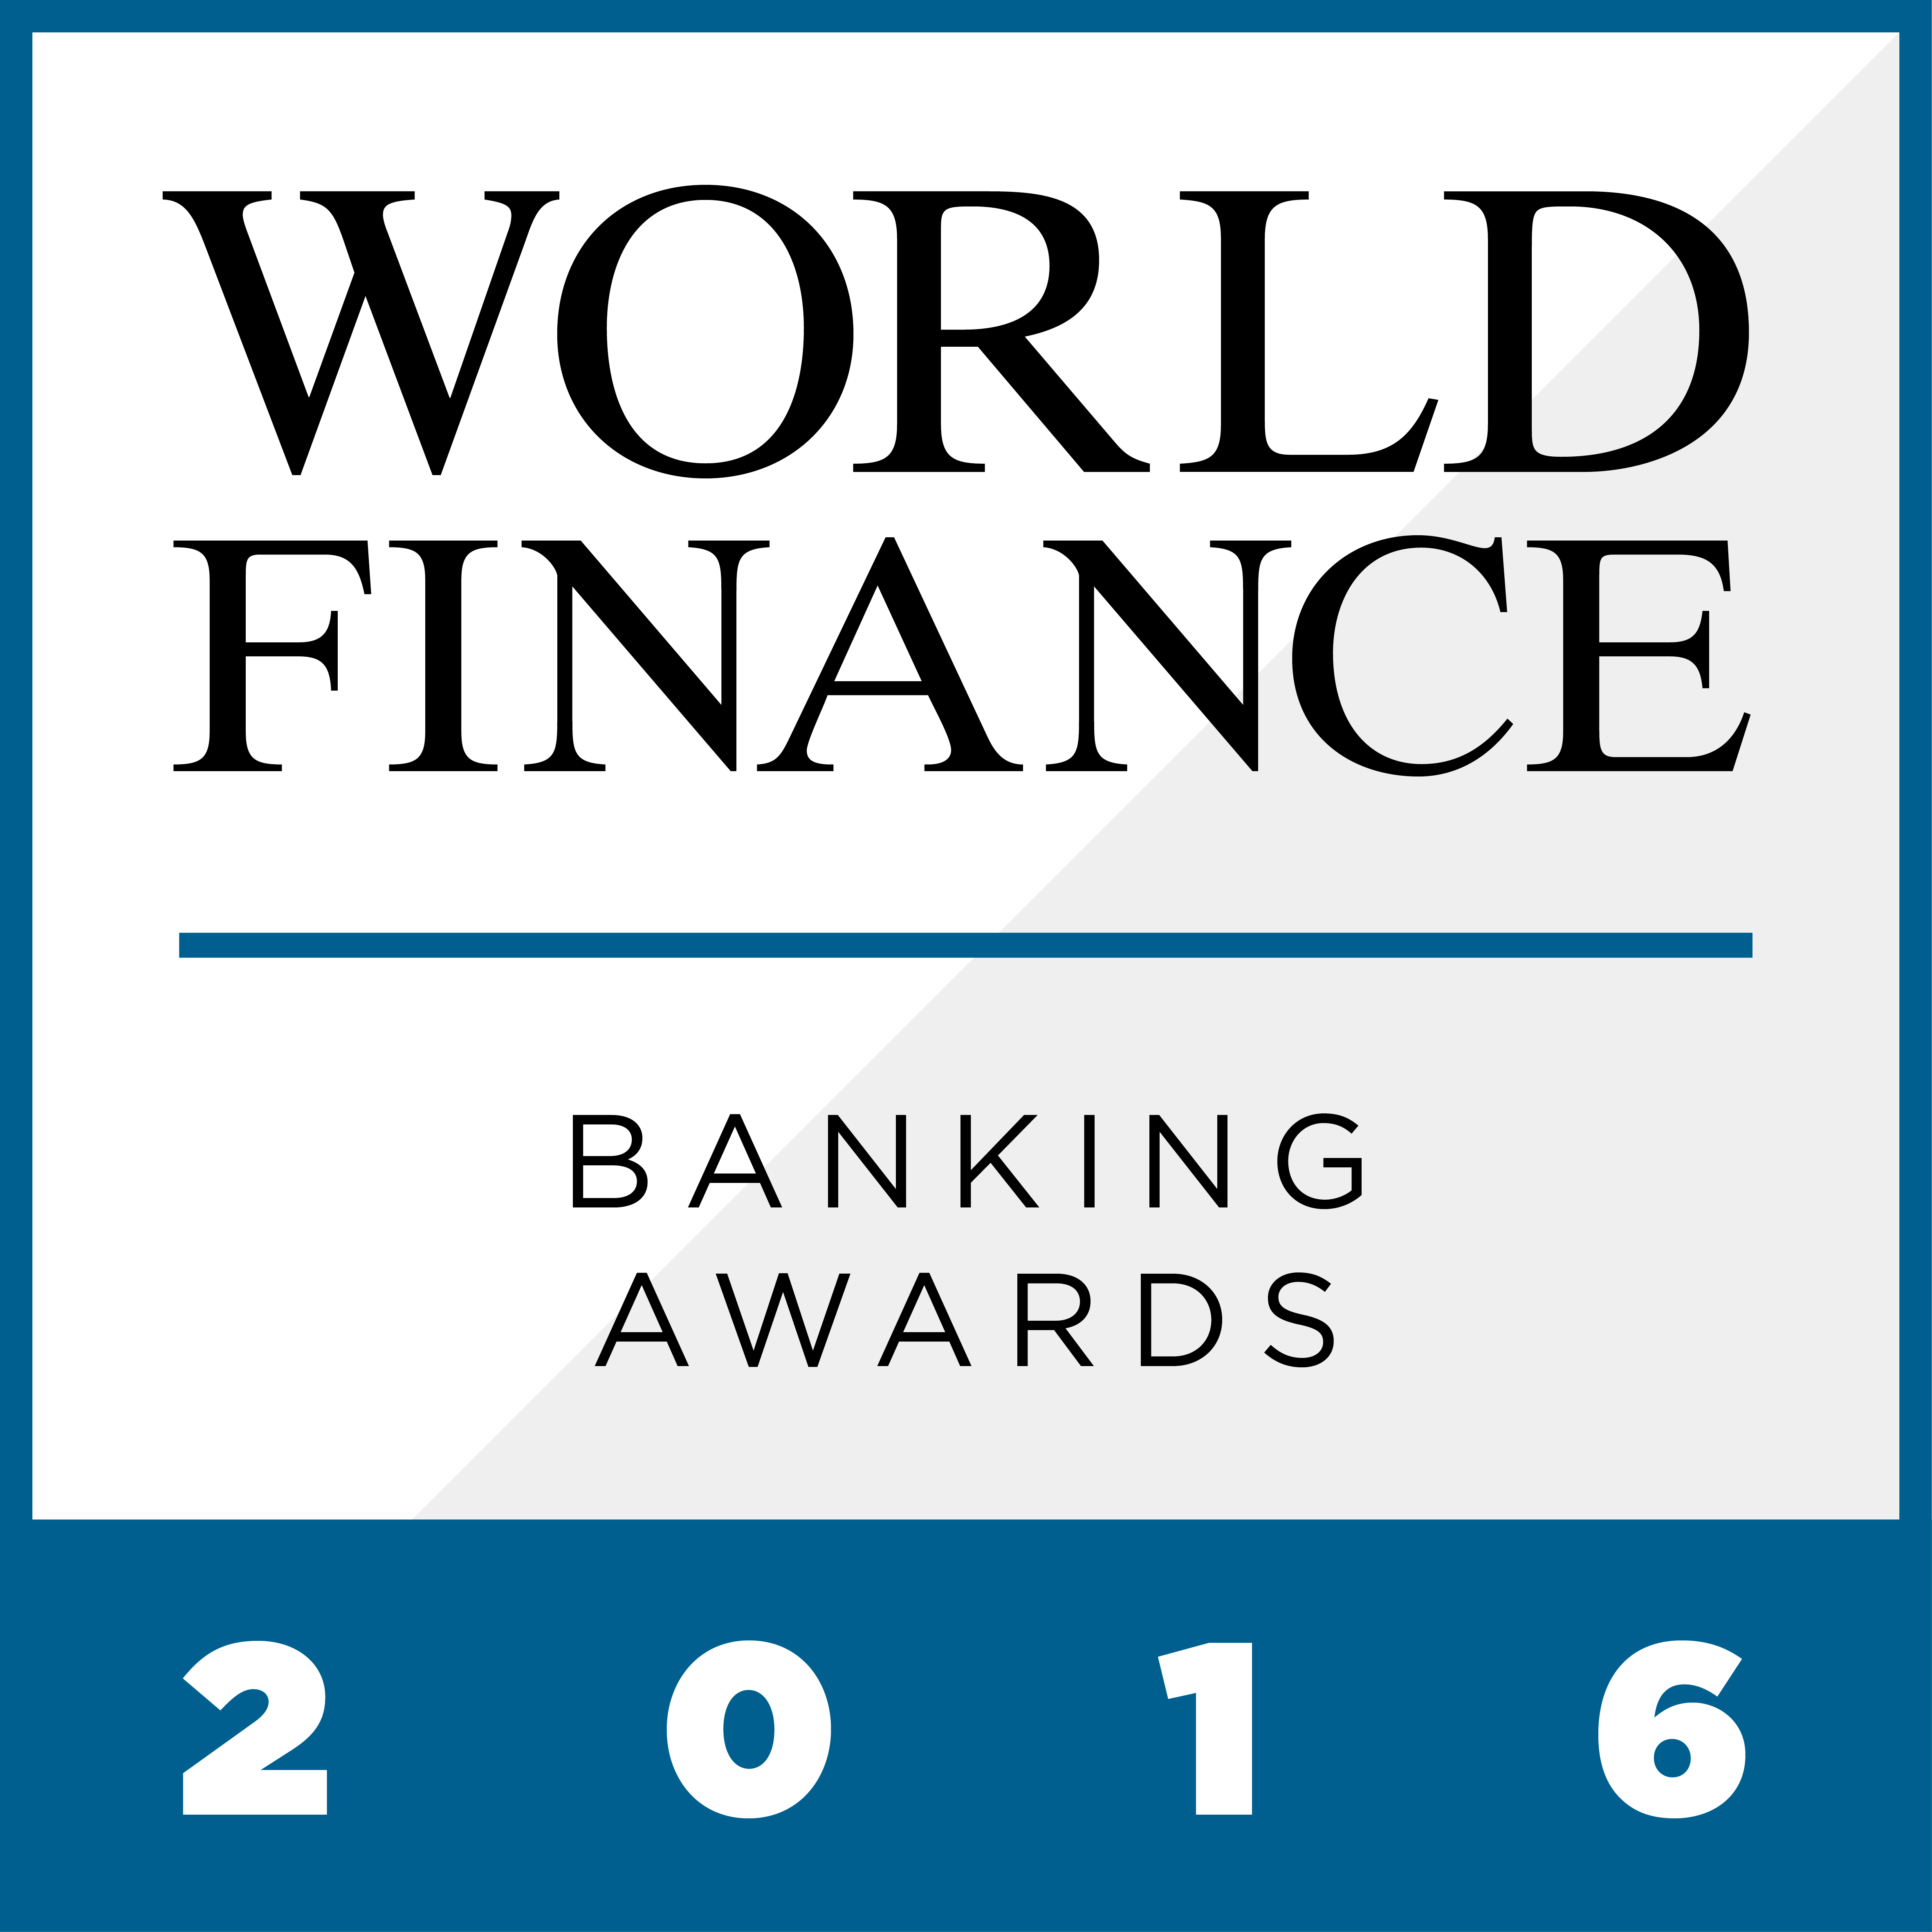 The World Finance Banking Guide 2016 offers an insight into the scale of transformation sweeping the banking sector